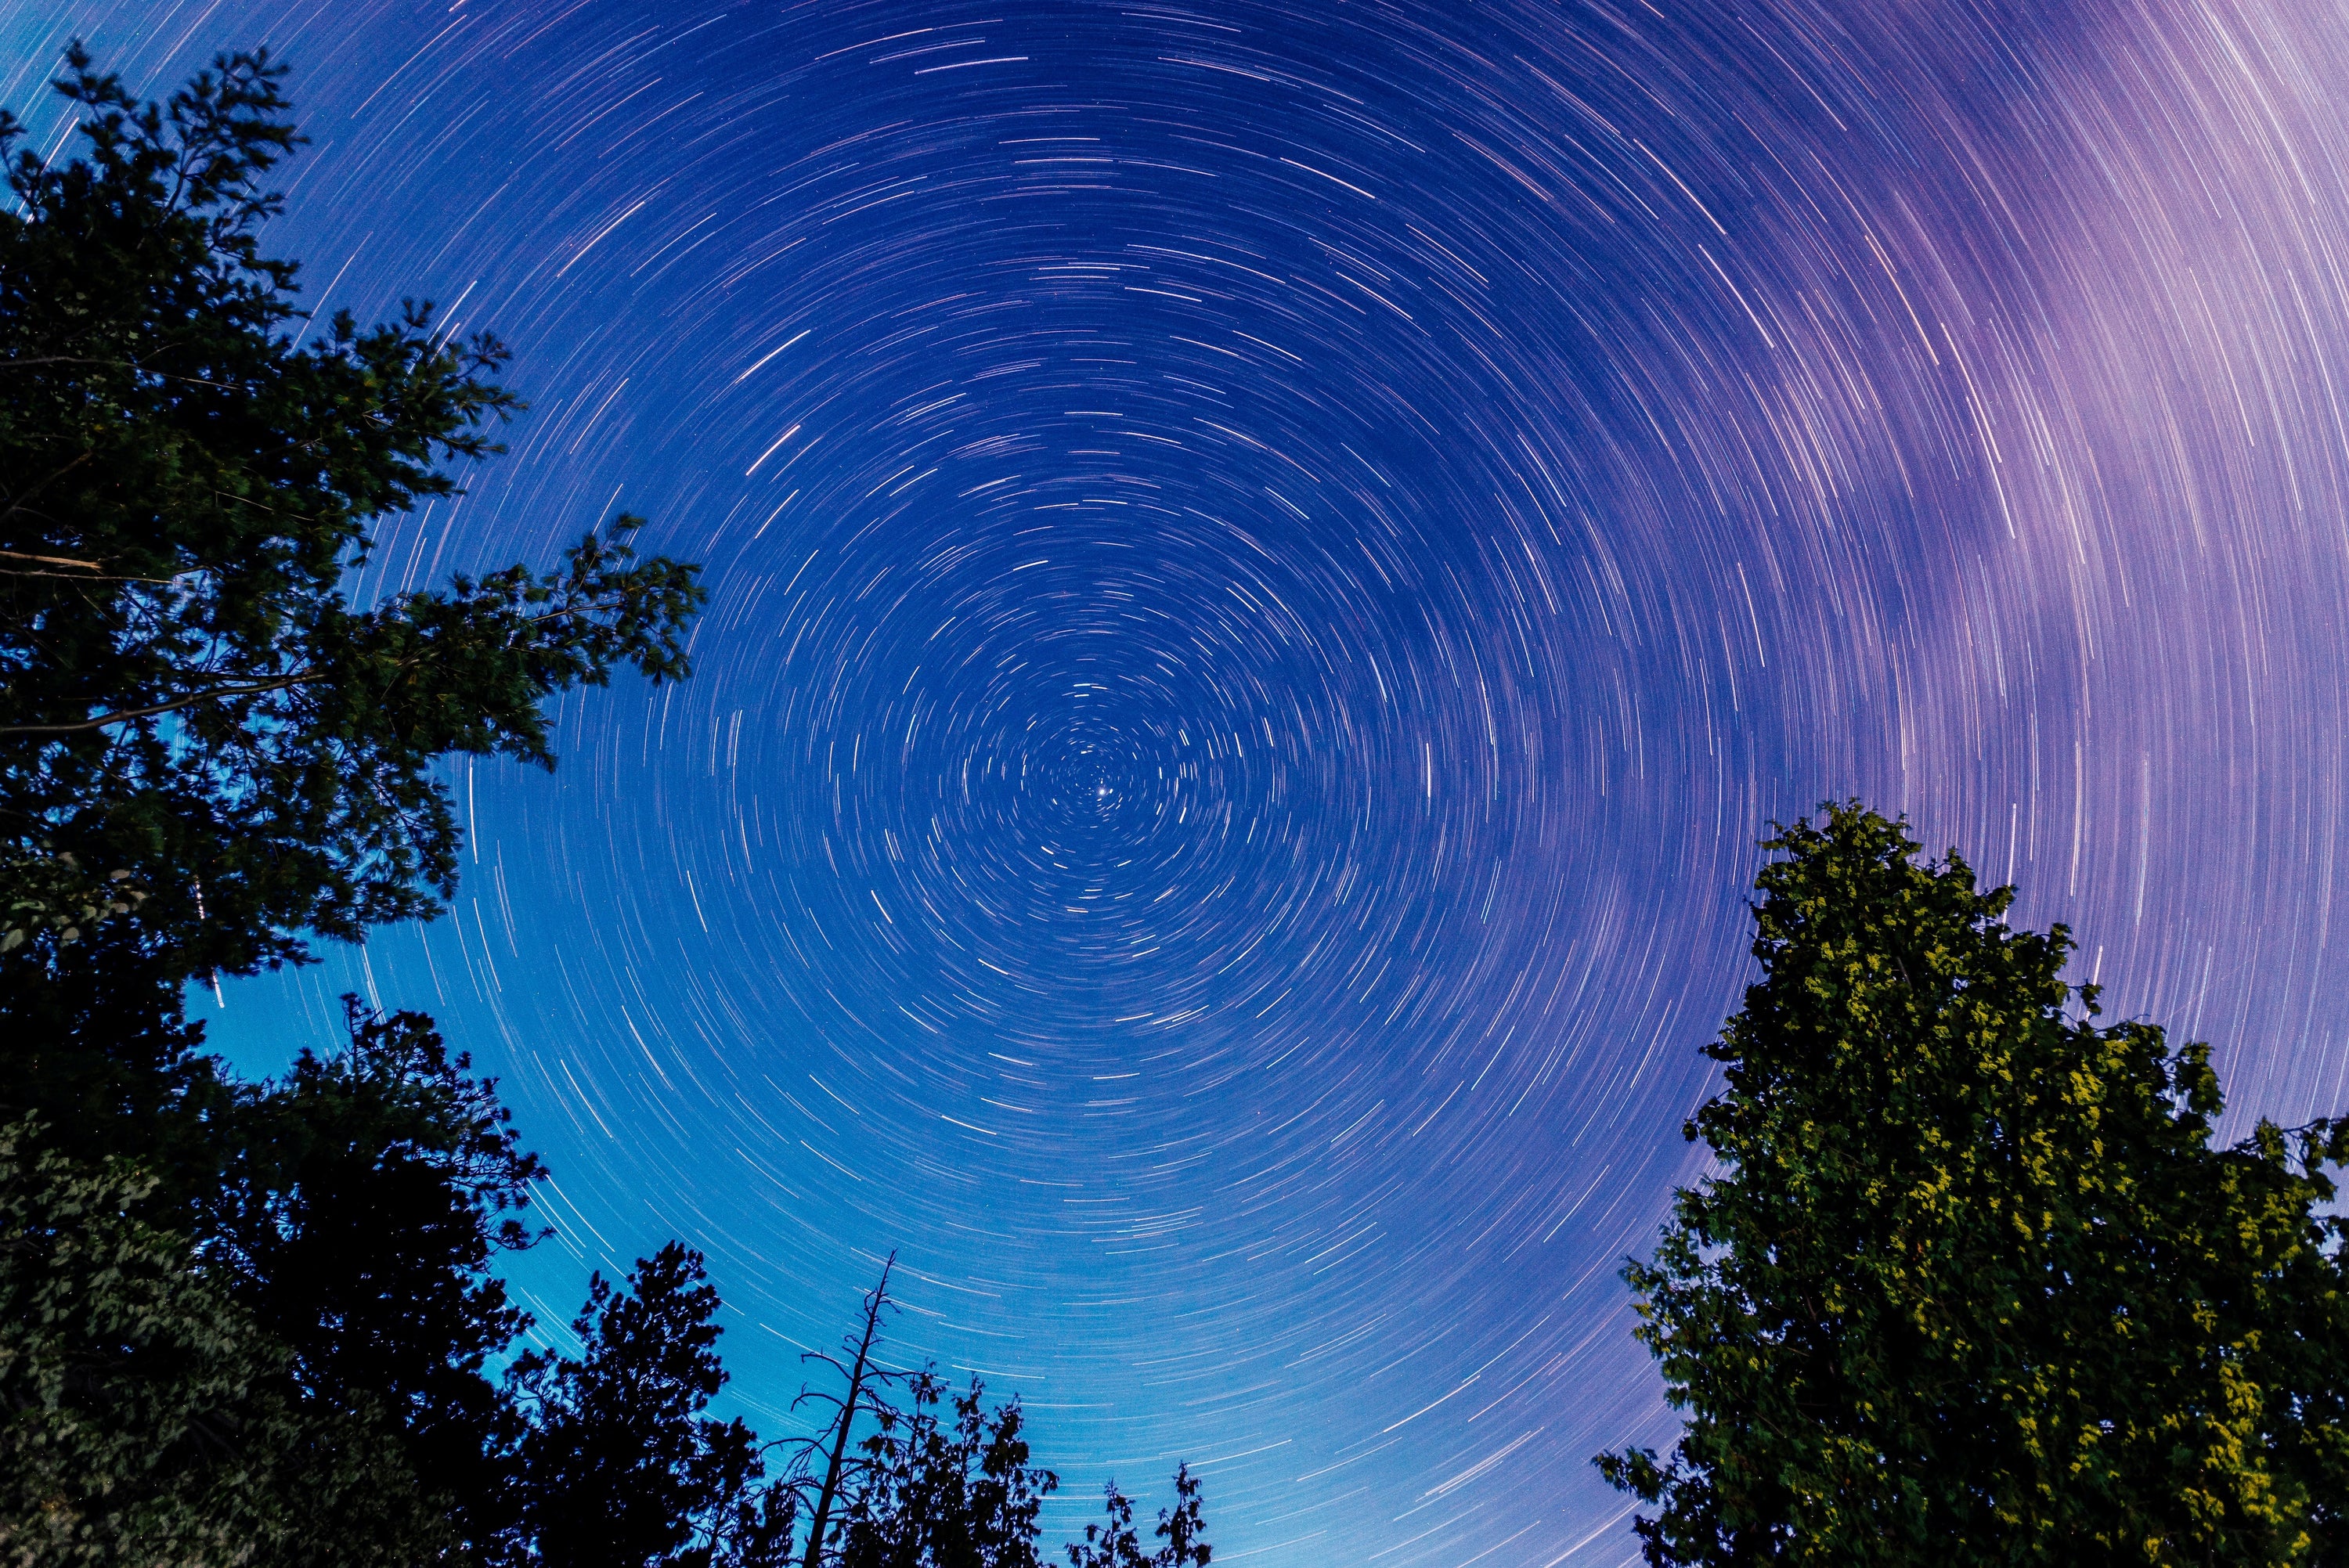 How To Capture the Most Stunning Star Timelapses